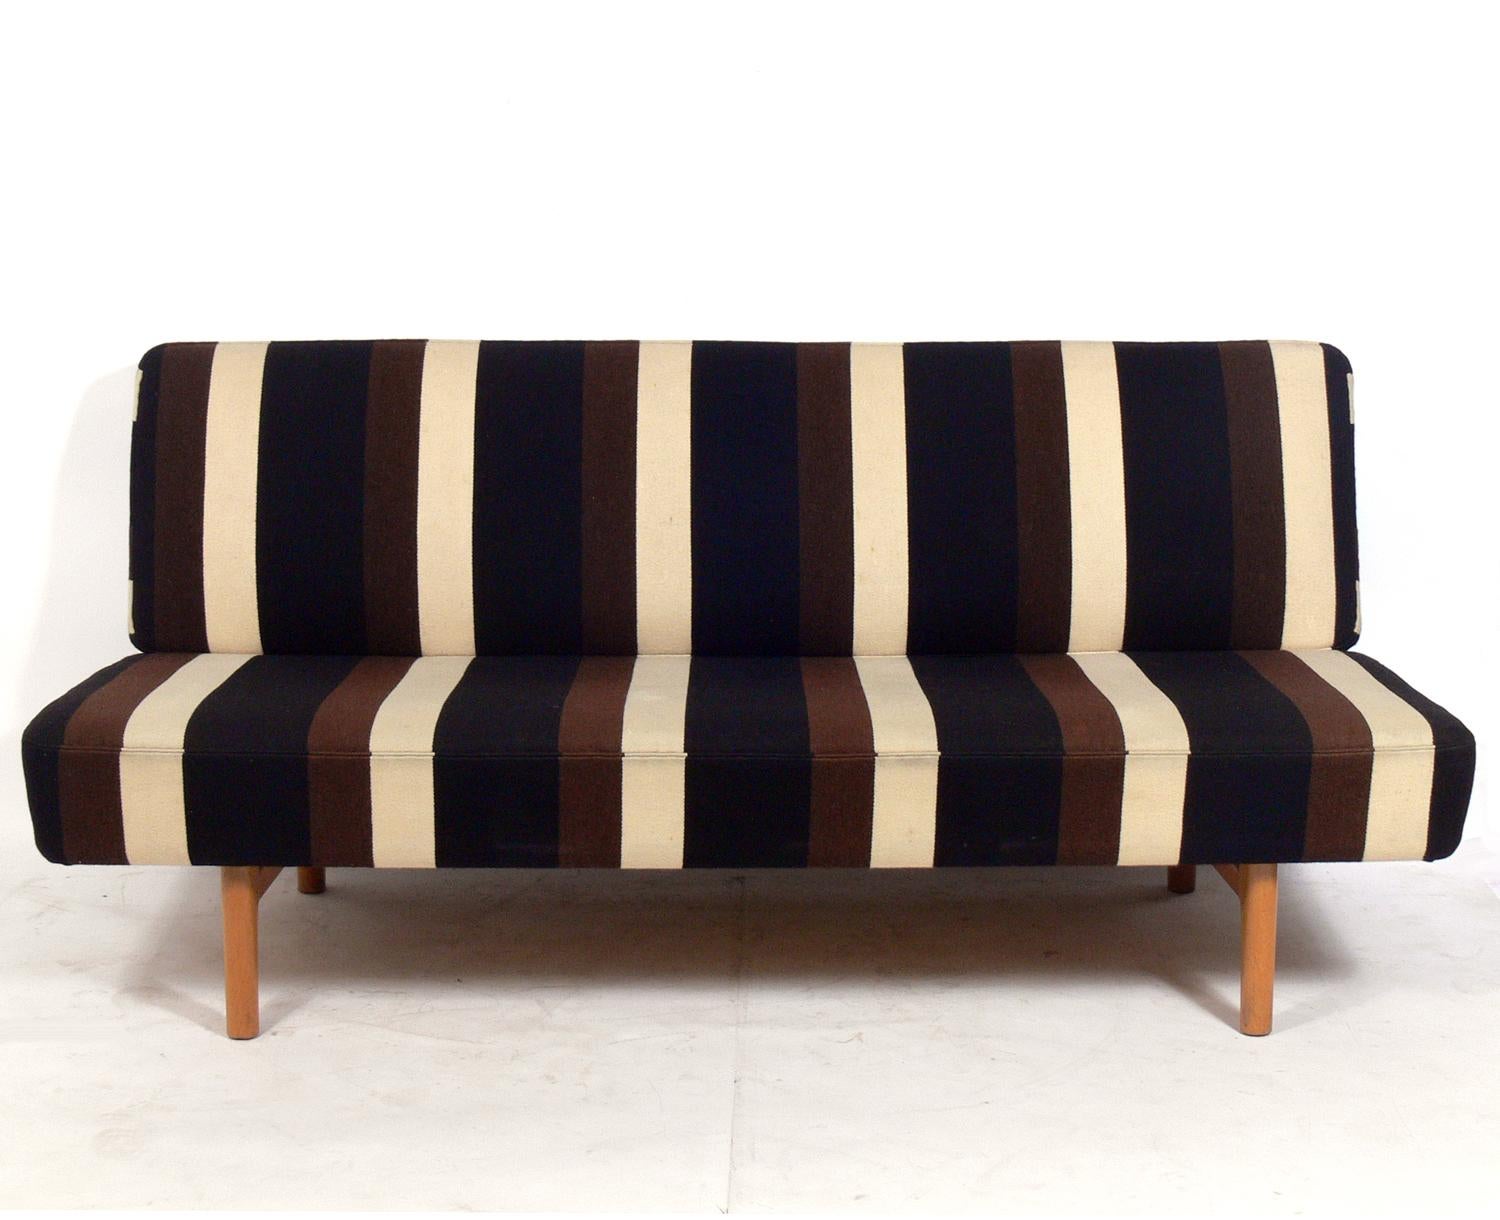 Rare Danish modern sofa, designed by Hans Wegner for Johannes Hansen, Denmark, circa 1950s. This example retains it’s original wool striped fabric. Signed with applied metal manufacturer’s label to underside: [Johannes Hansen Cabinet Makers